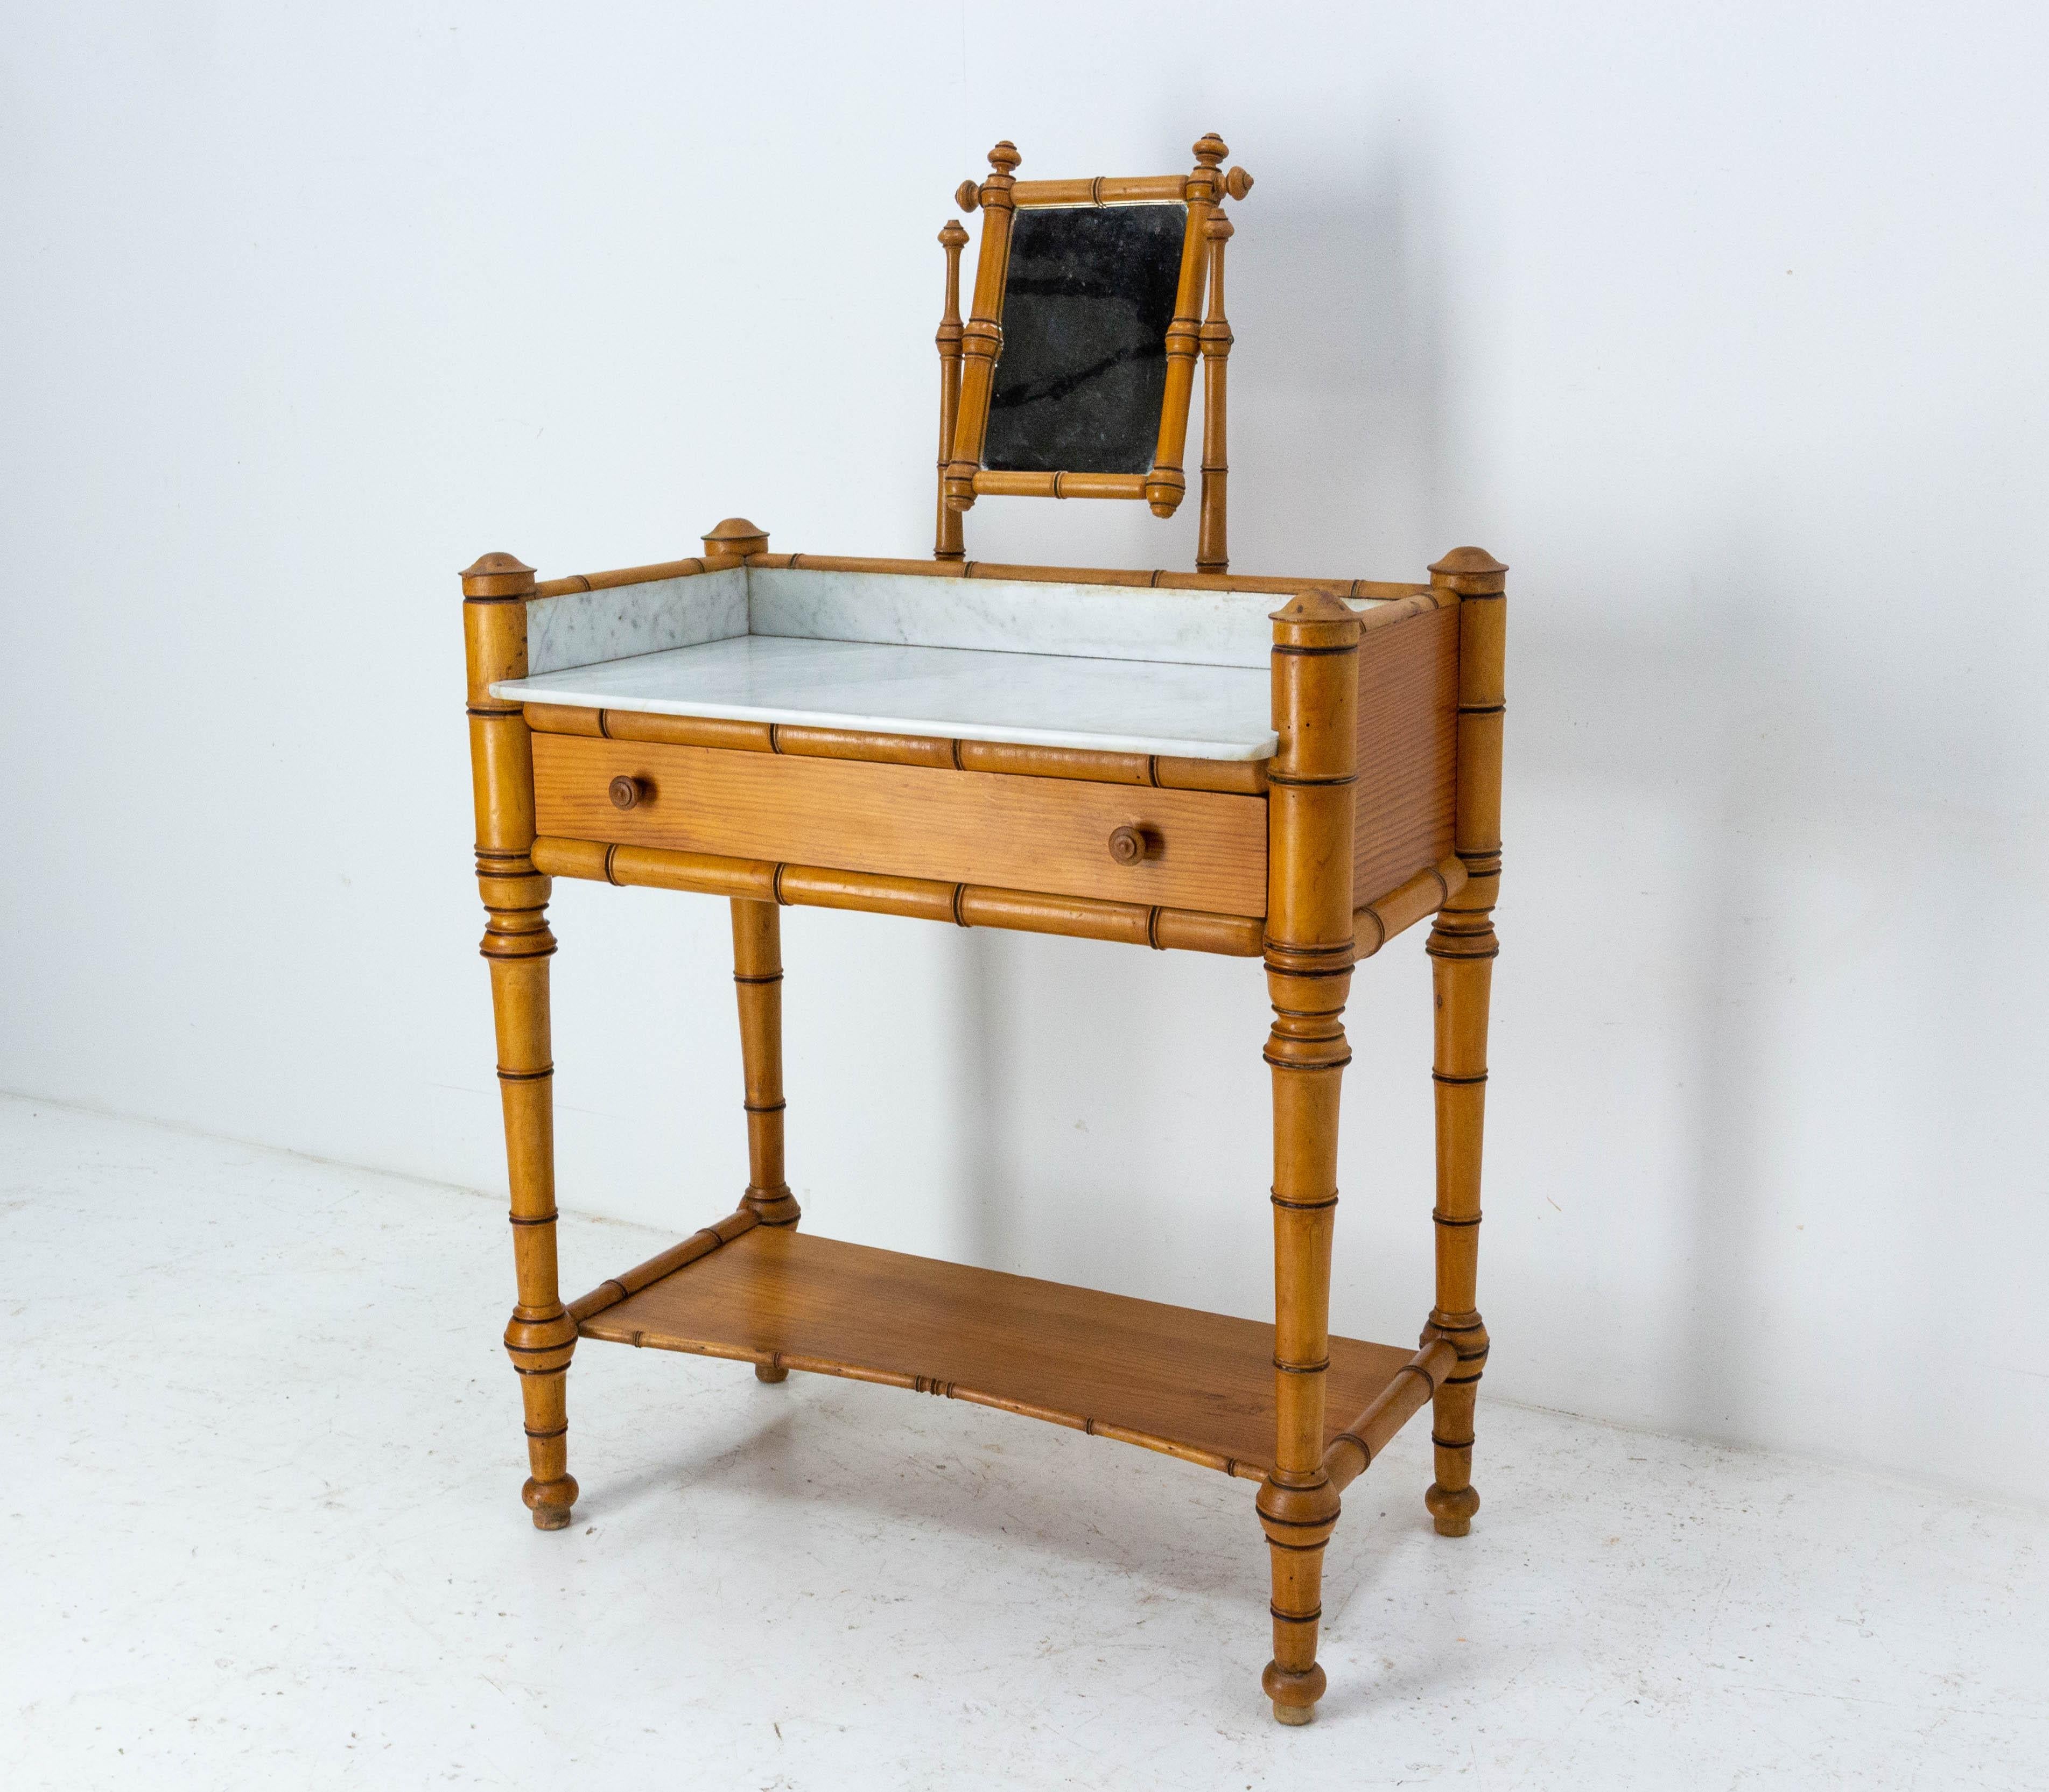 Vanity dressing table with central mirror, one drawer and one board, in the bamboo style
French early 20th century
Pine, linden wood, marble and mirror. 
All original

Dimensions:
Height of the table: 29.33 in. (74.5 cm)
Height between floor